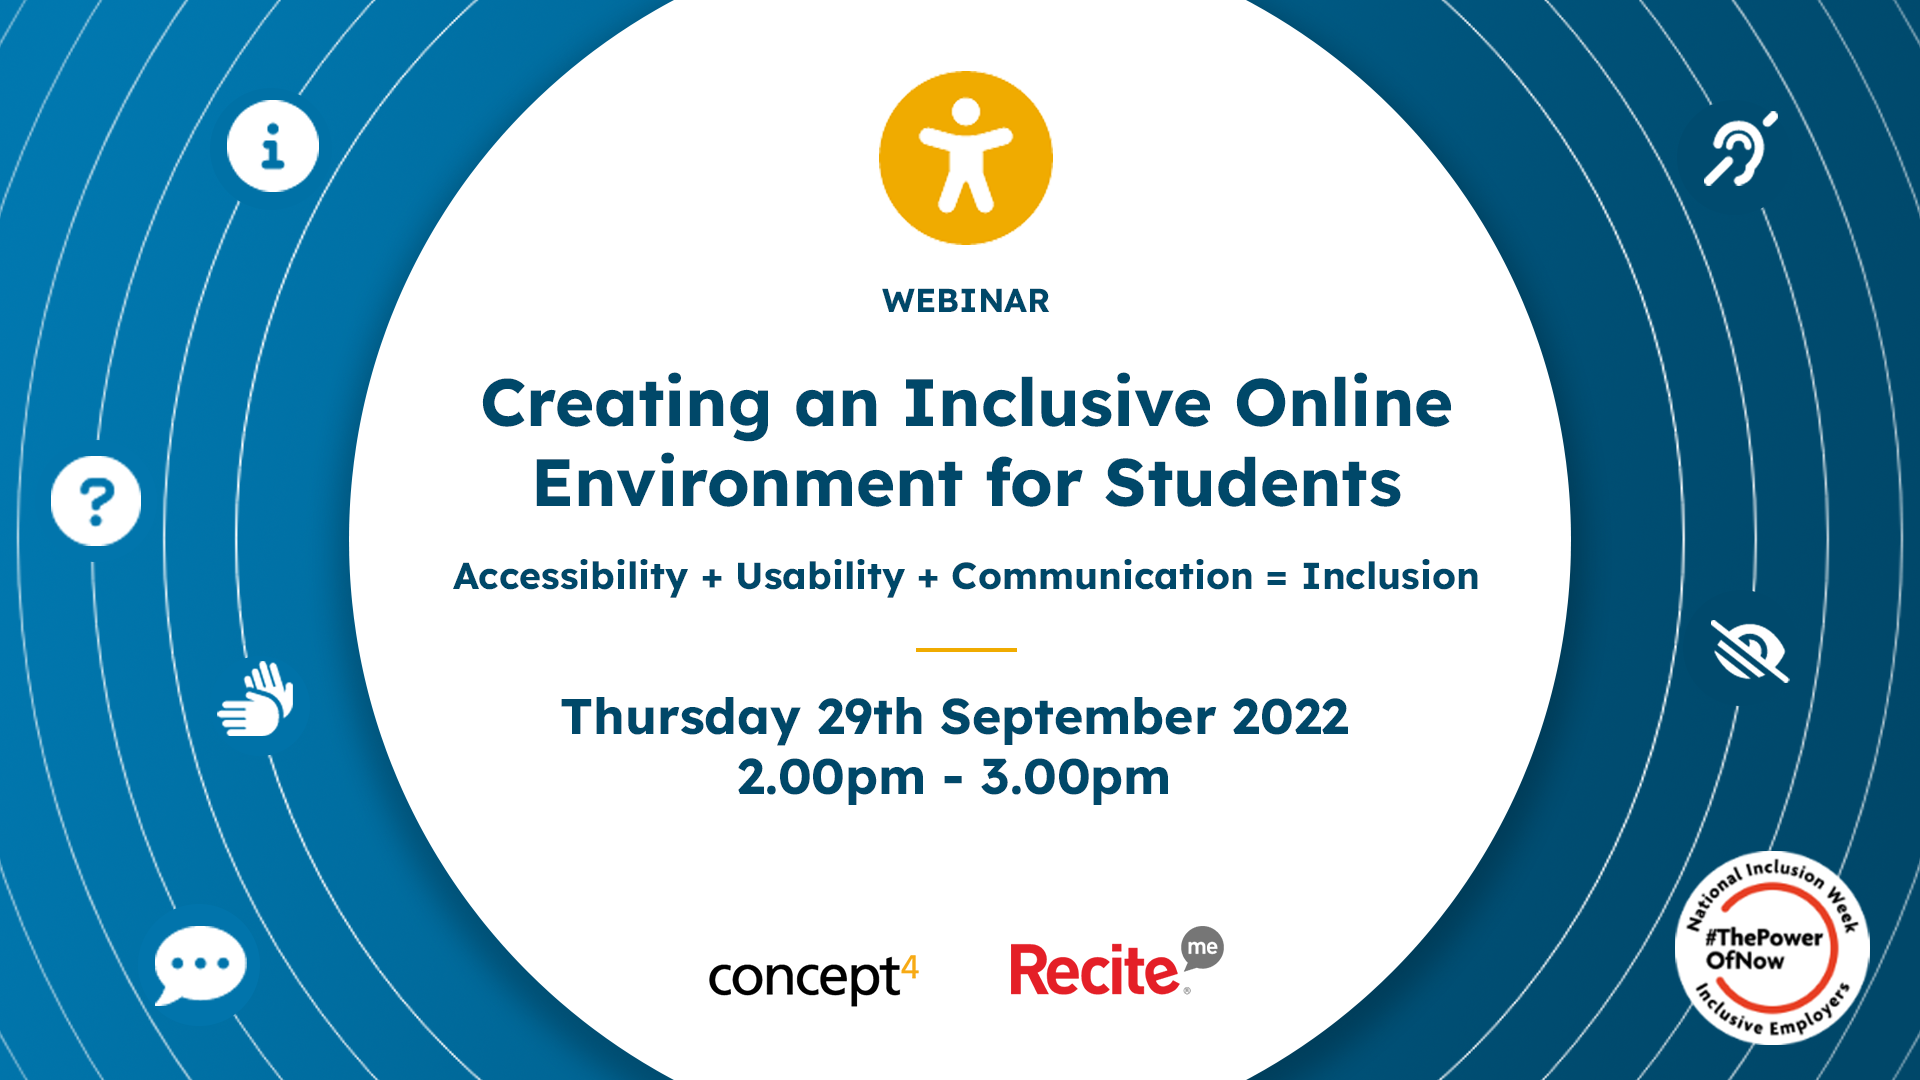 Creating an Inclusive Online Experience for Students